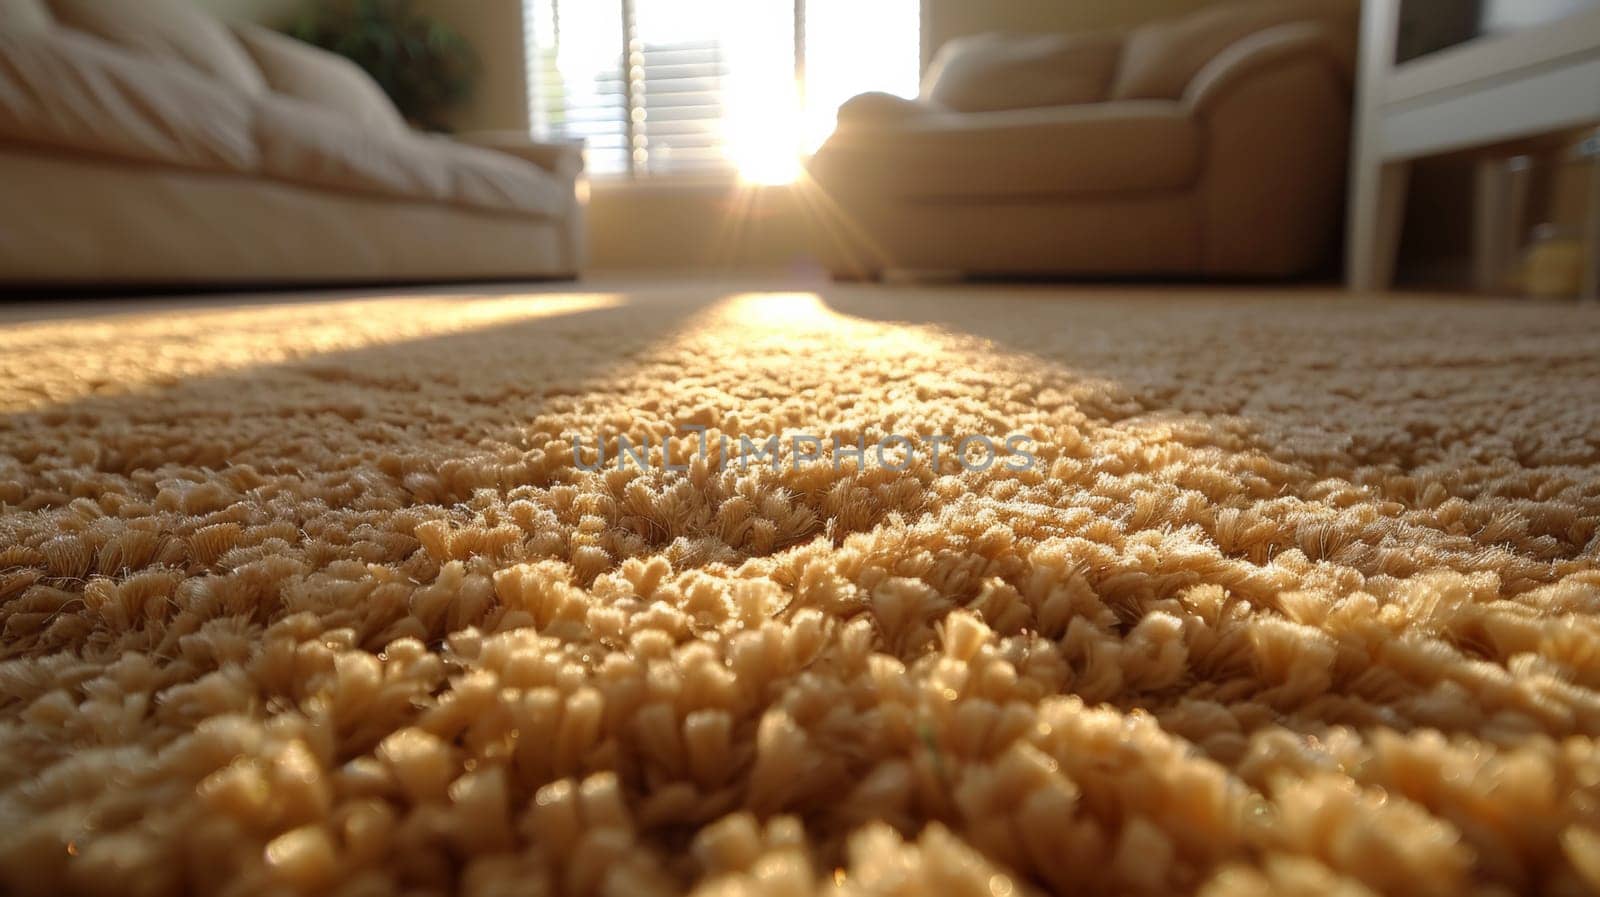 A close up of a carpeted floor with sunlight shining through